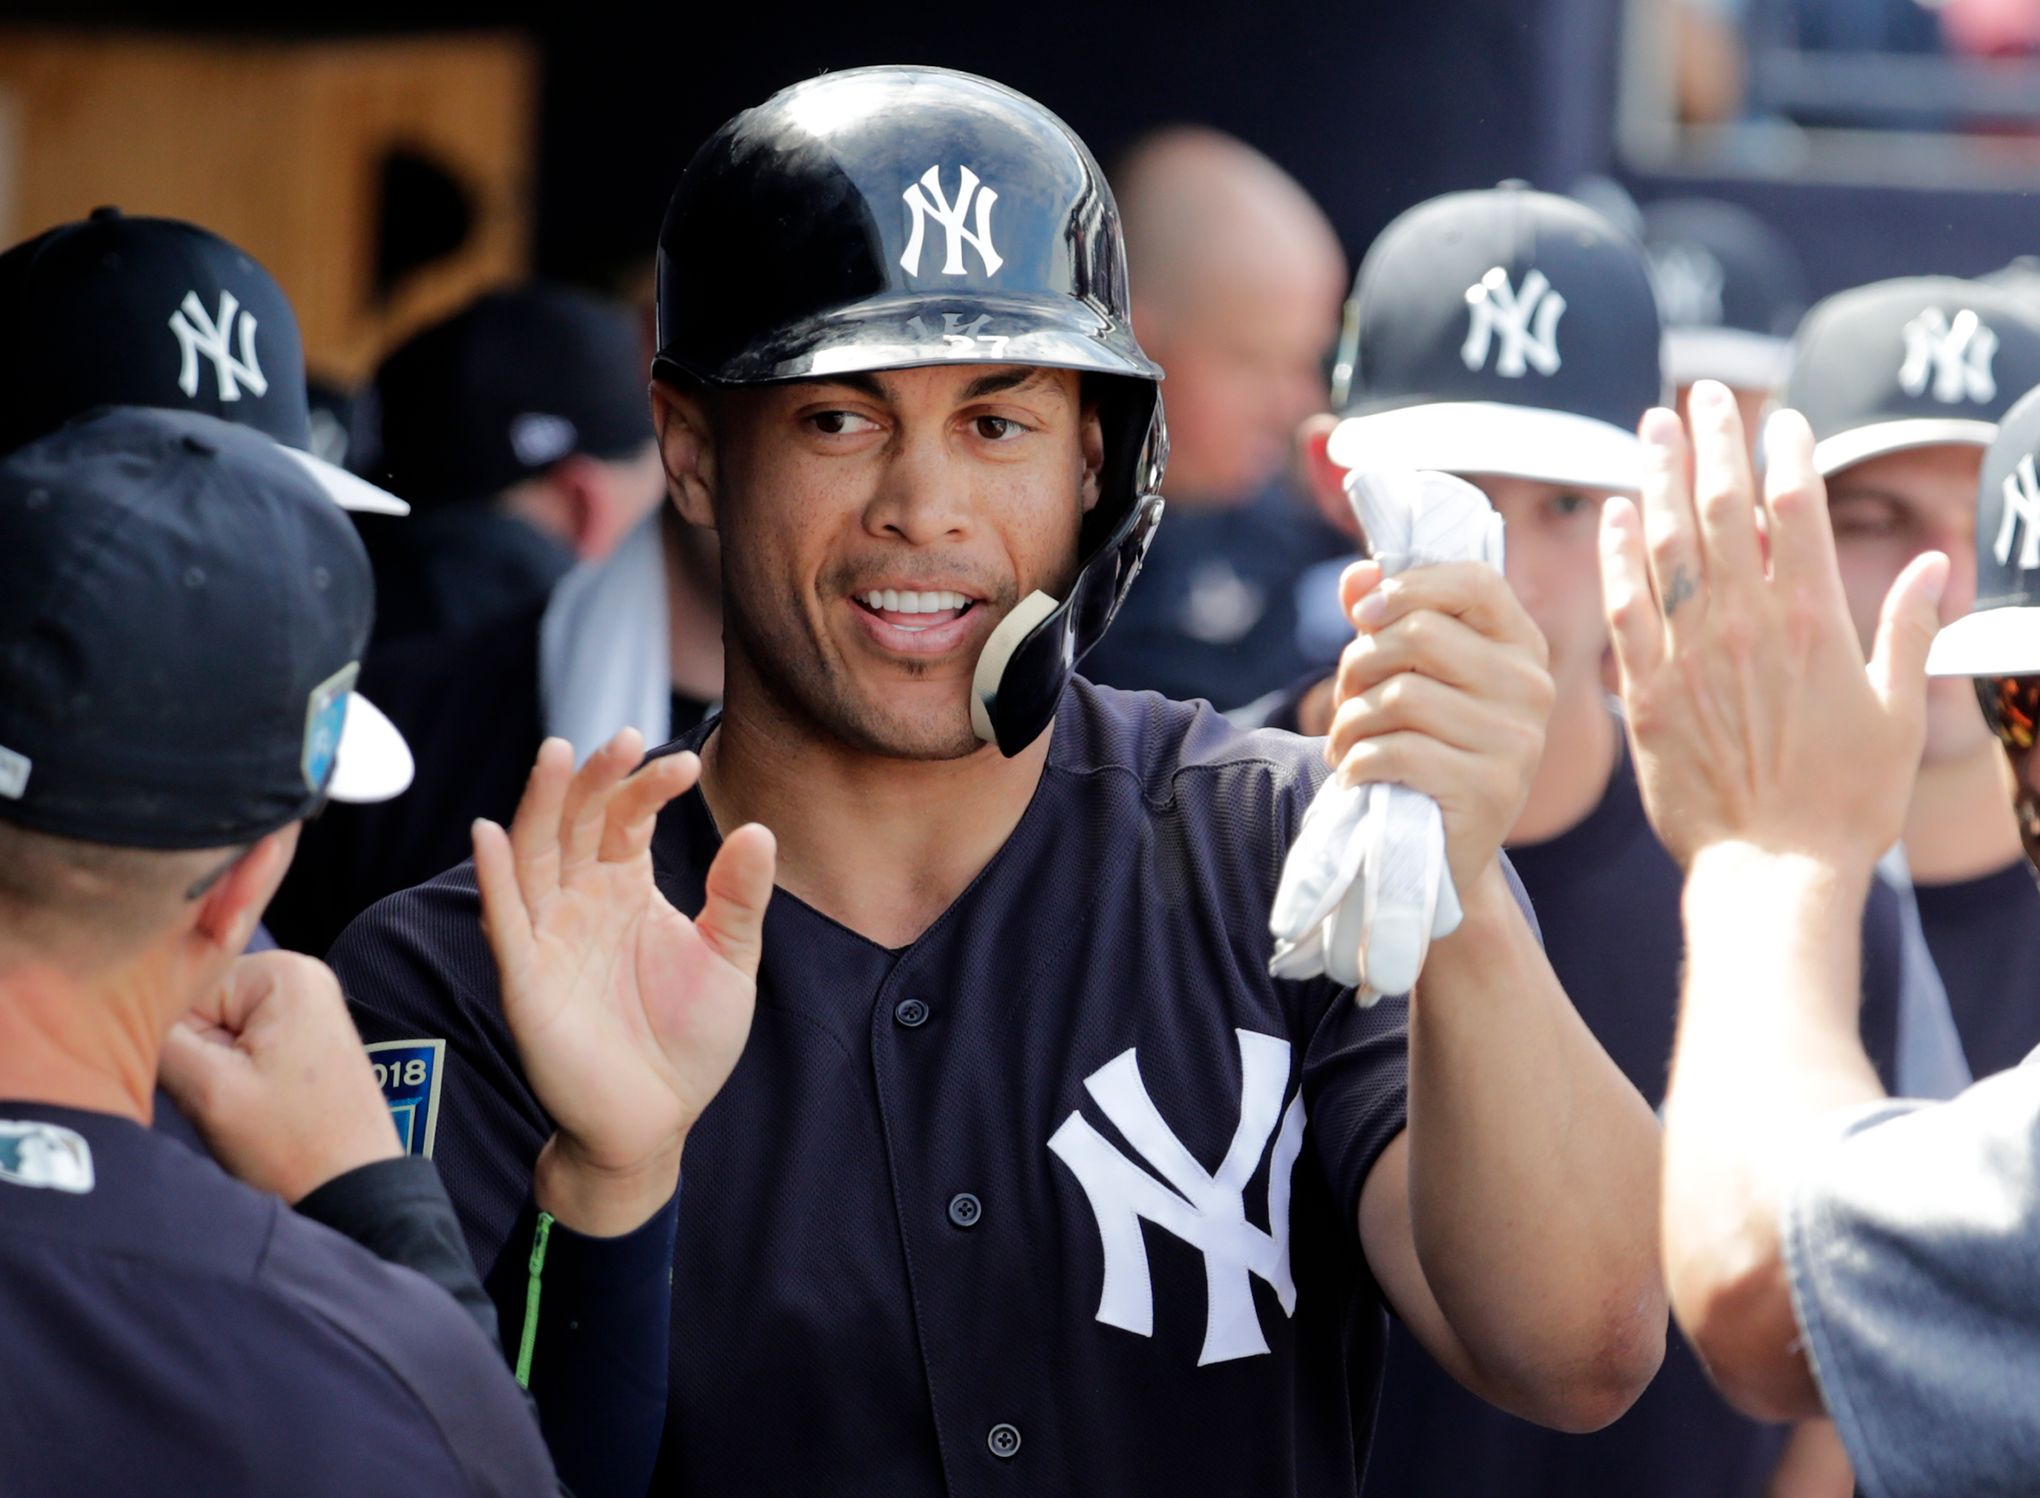 Gary Sanchez bashing 'over the top,' Yankees' Aaron Boone says 